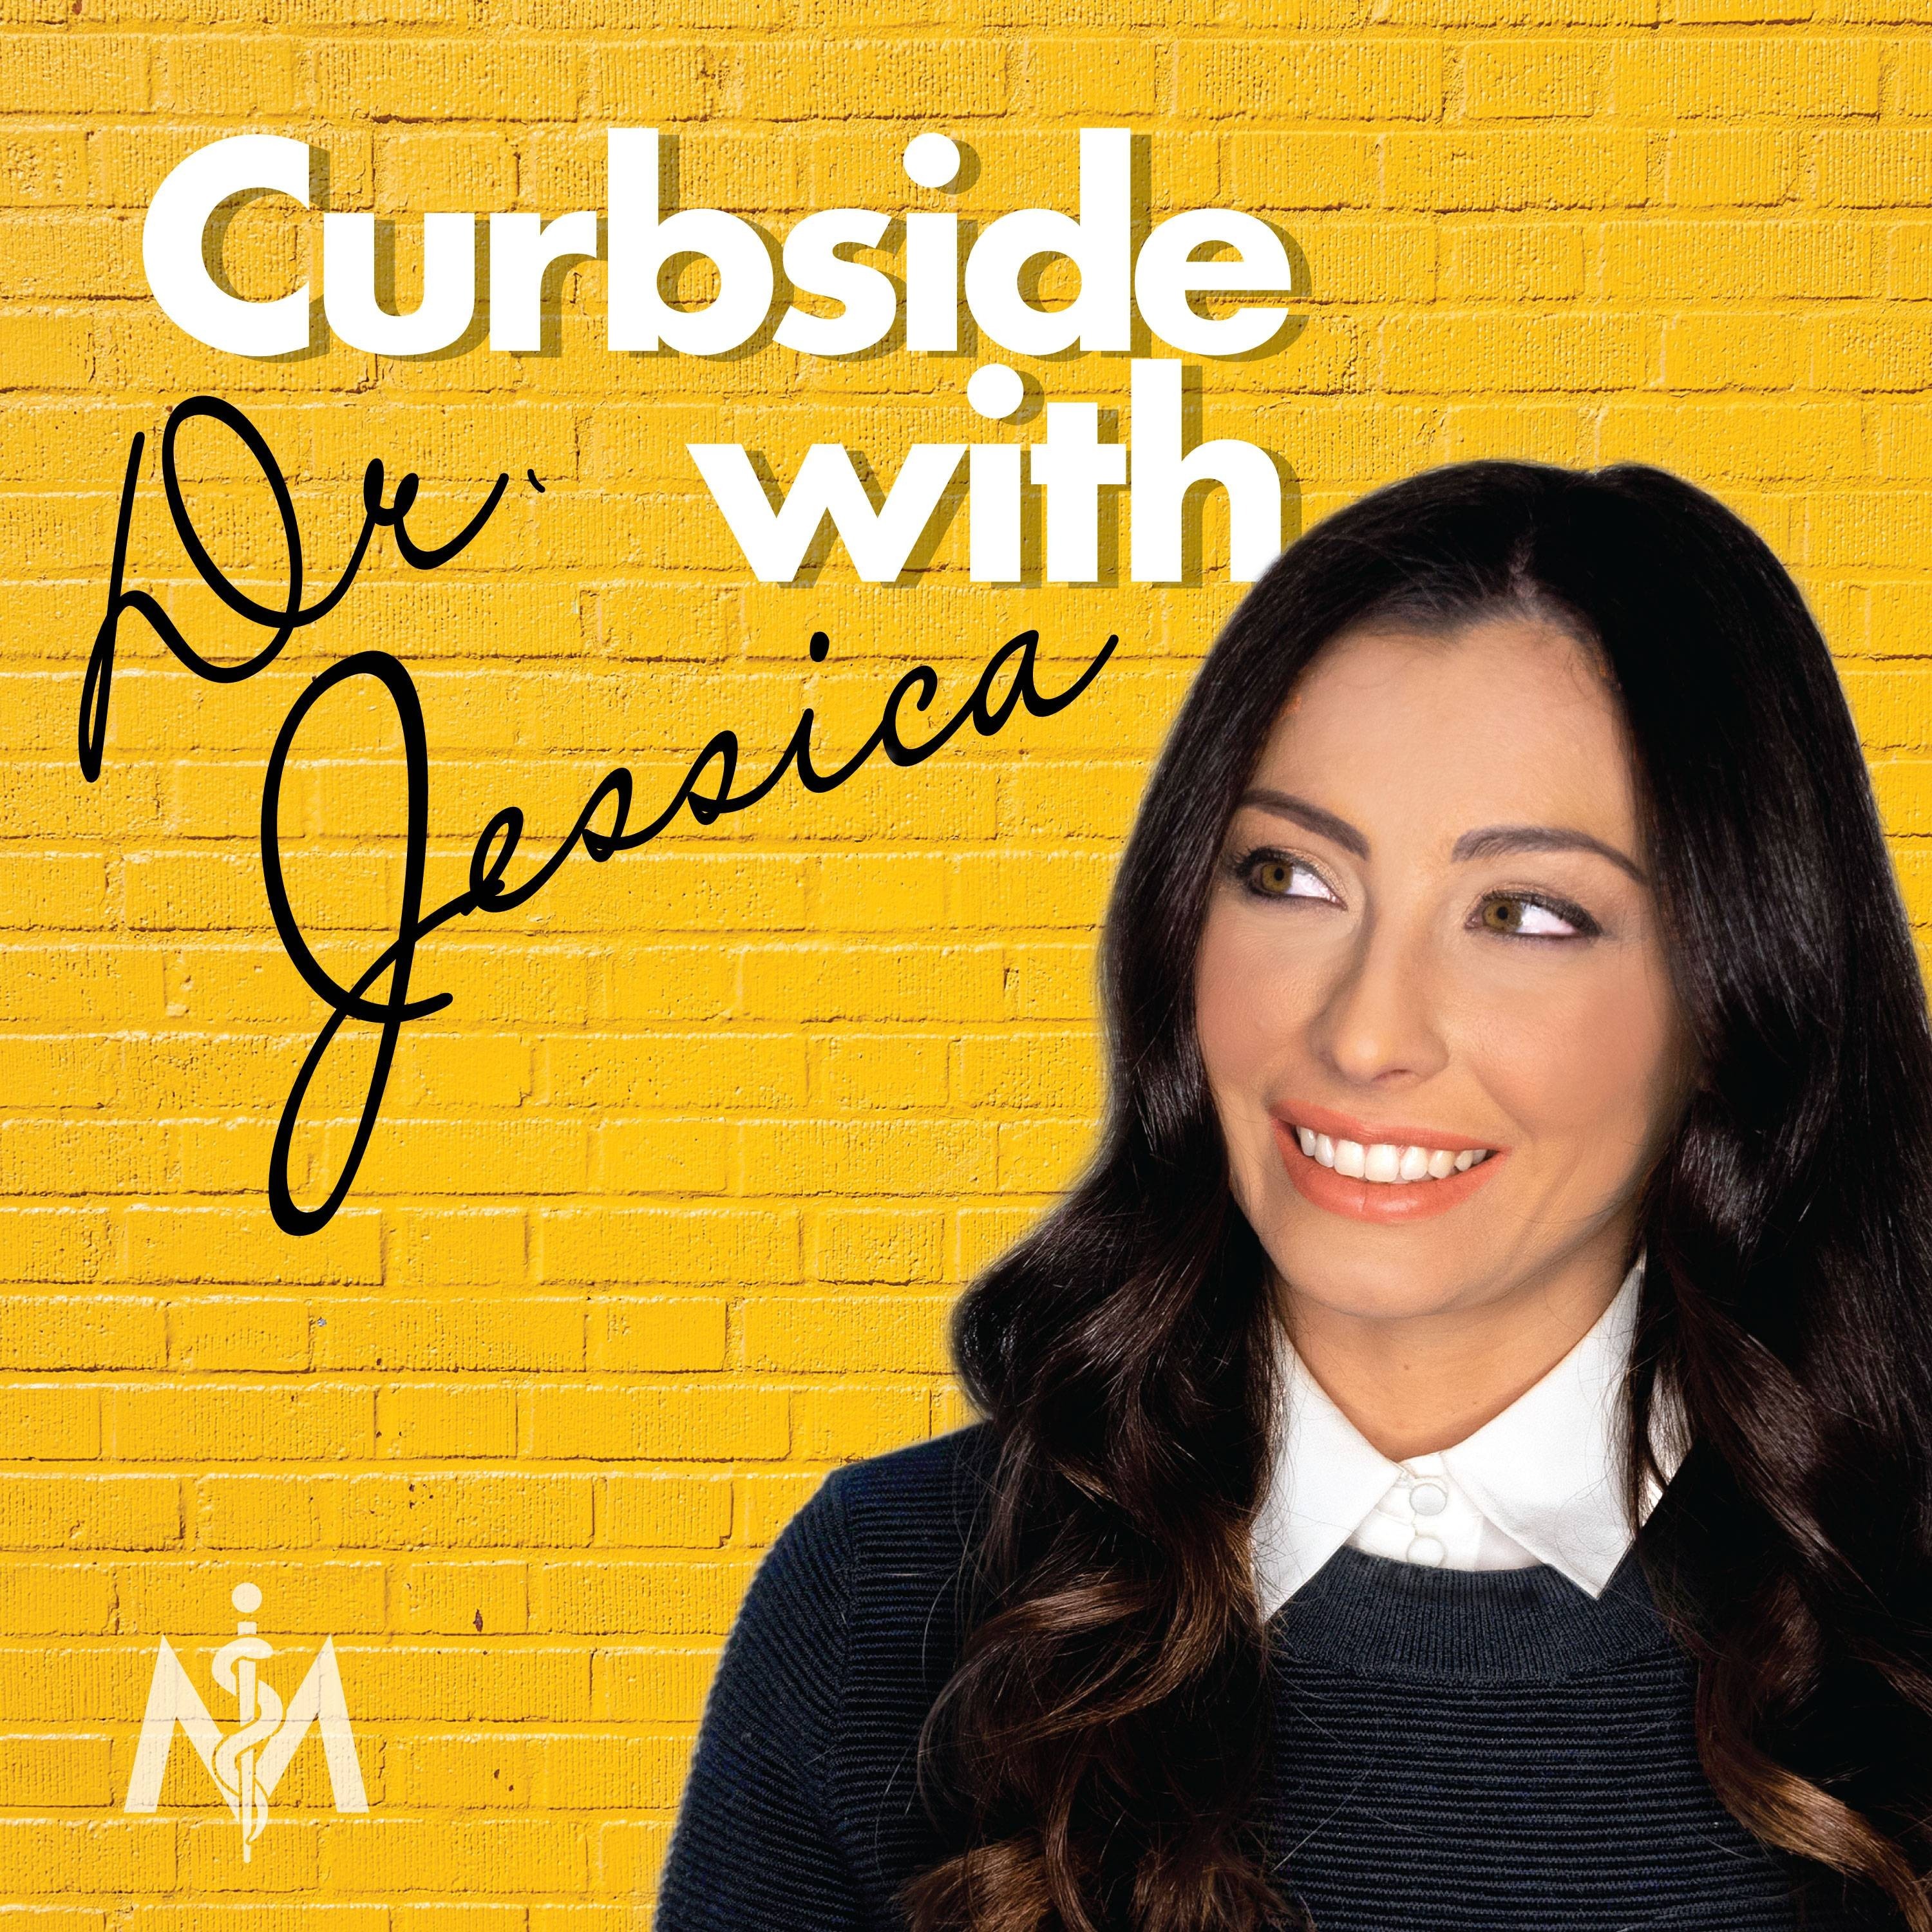 Curbside with Dr. Jessica by Master Clinicians